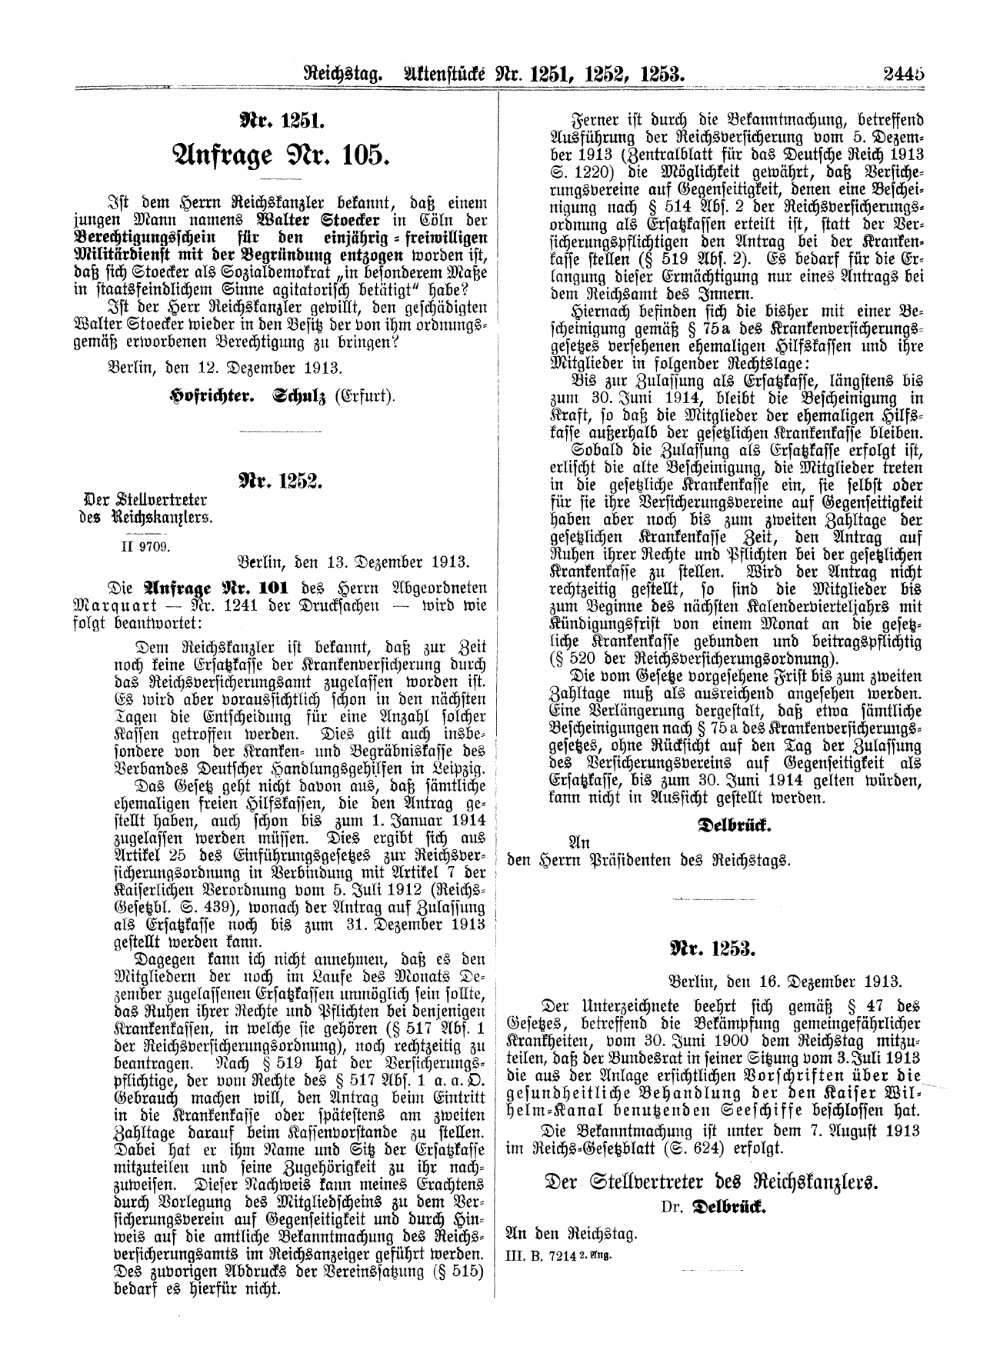 Scan of page 2445